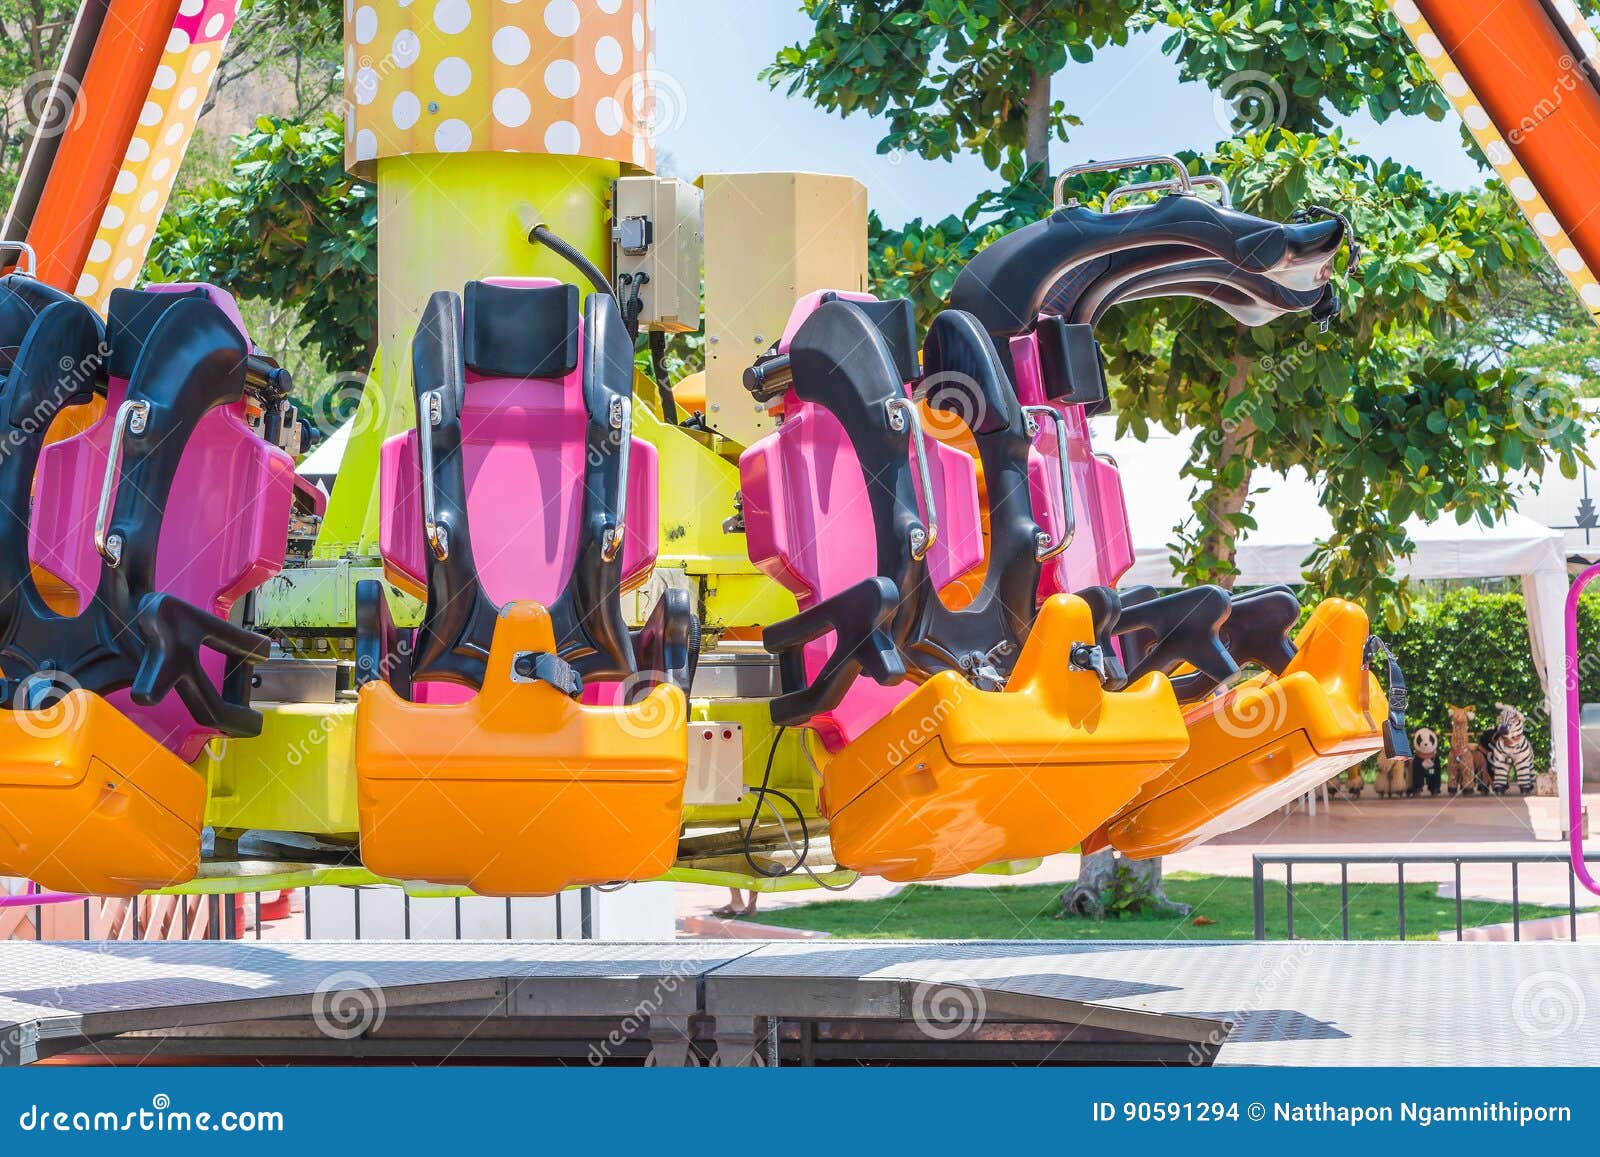 Roller coaster seats stock photo. Image of activity, holiday - 90591294